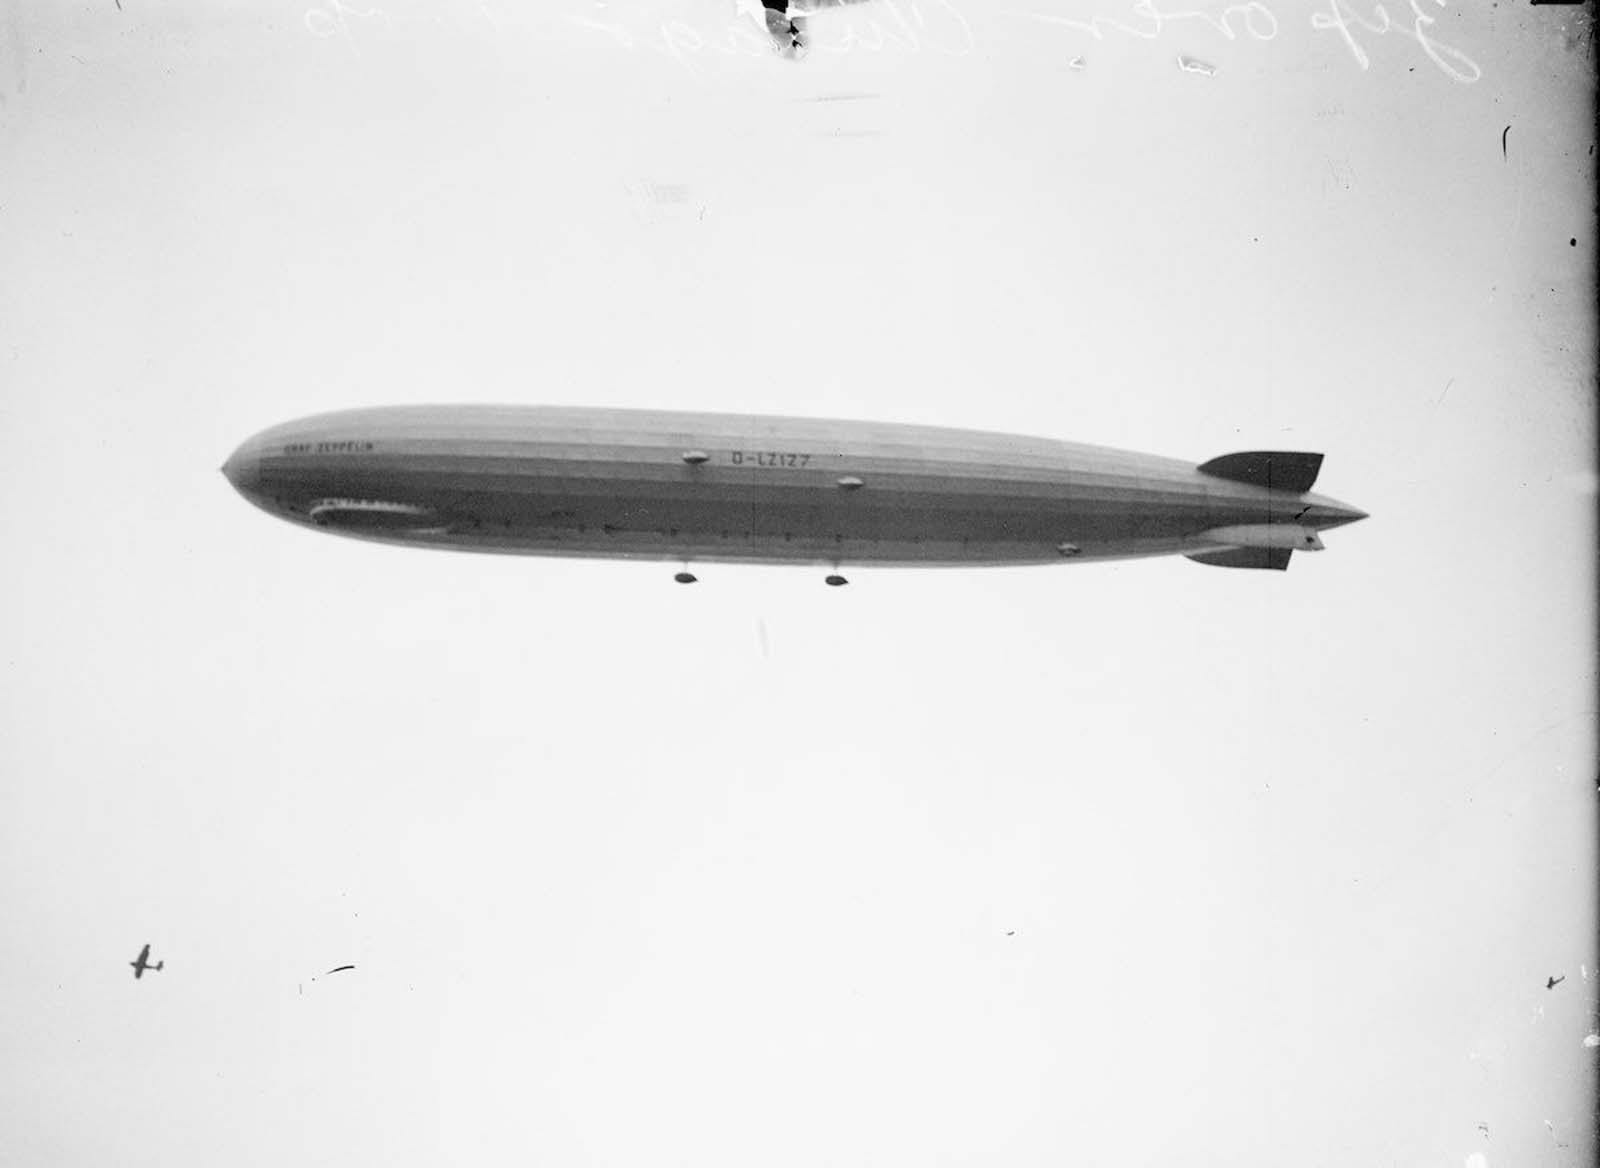 The Graf Zeppelin flies over Chicago, Illinois. An airplane is visible below the Zeppelin on the lower left half of the image.